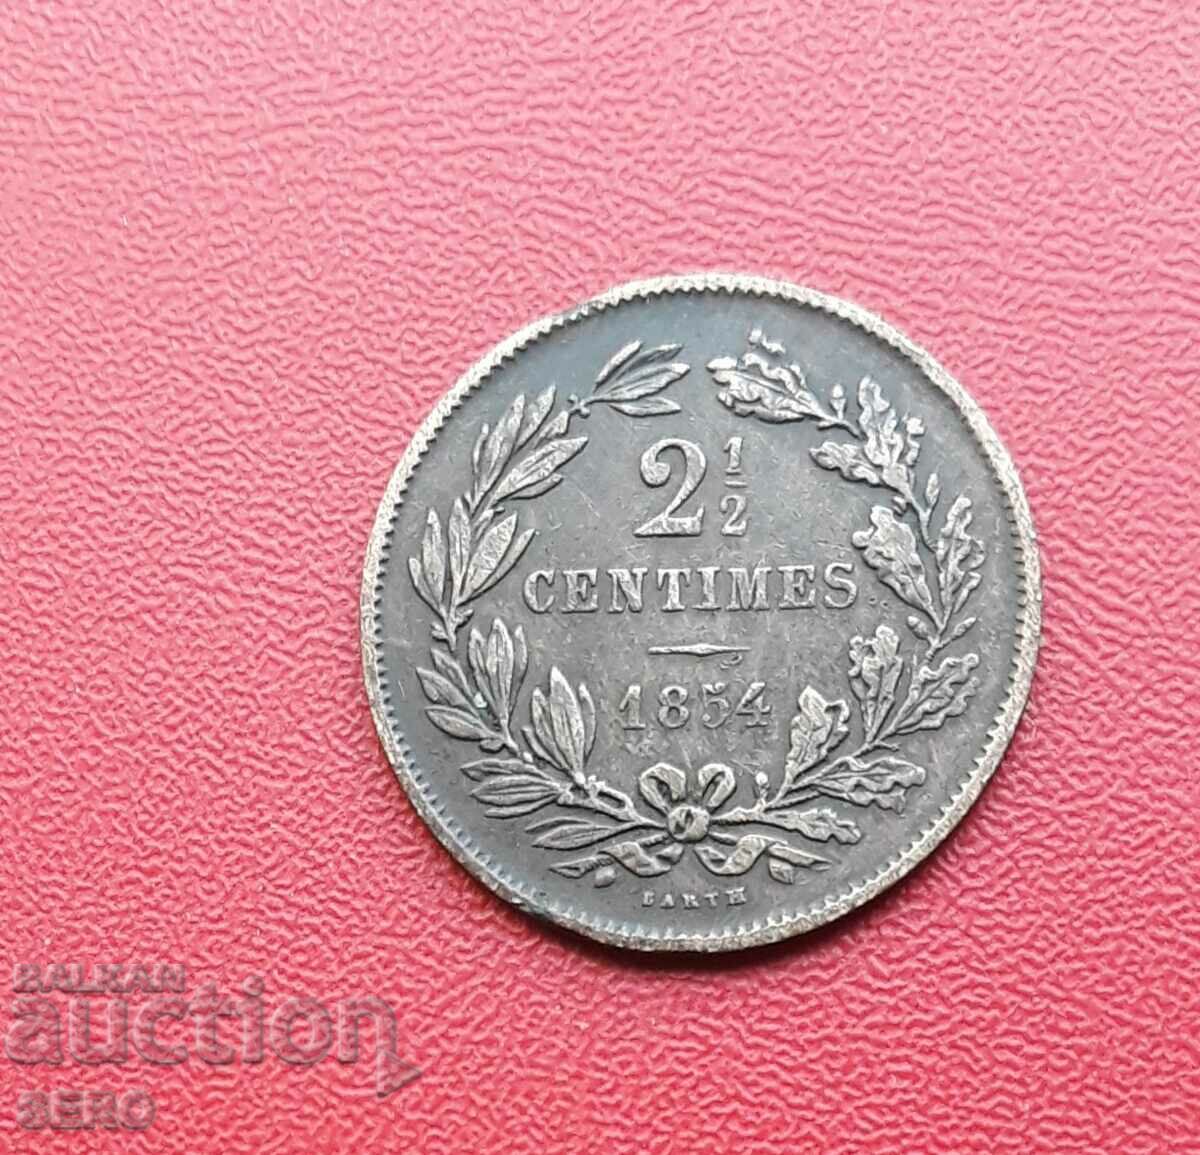 Luxembourg-2.5 cents 1854-rare